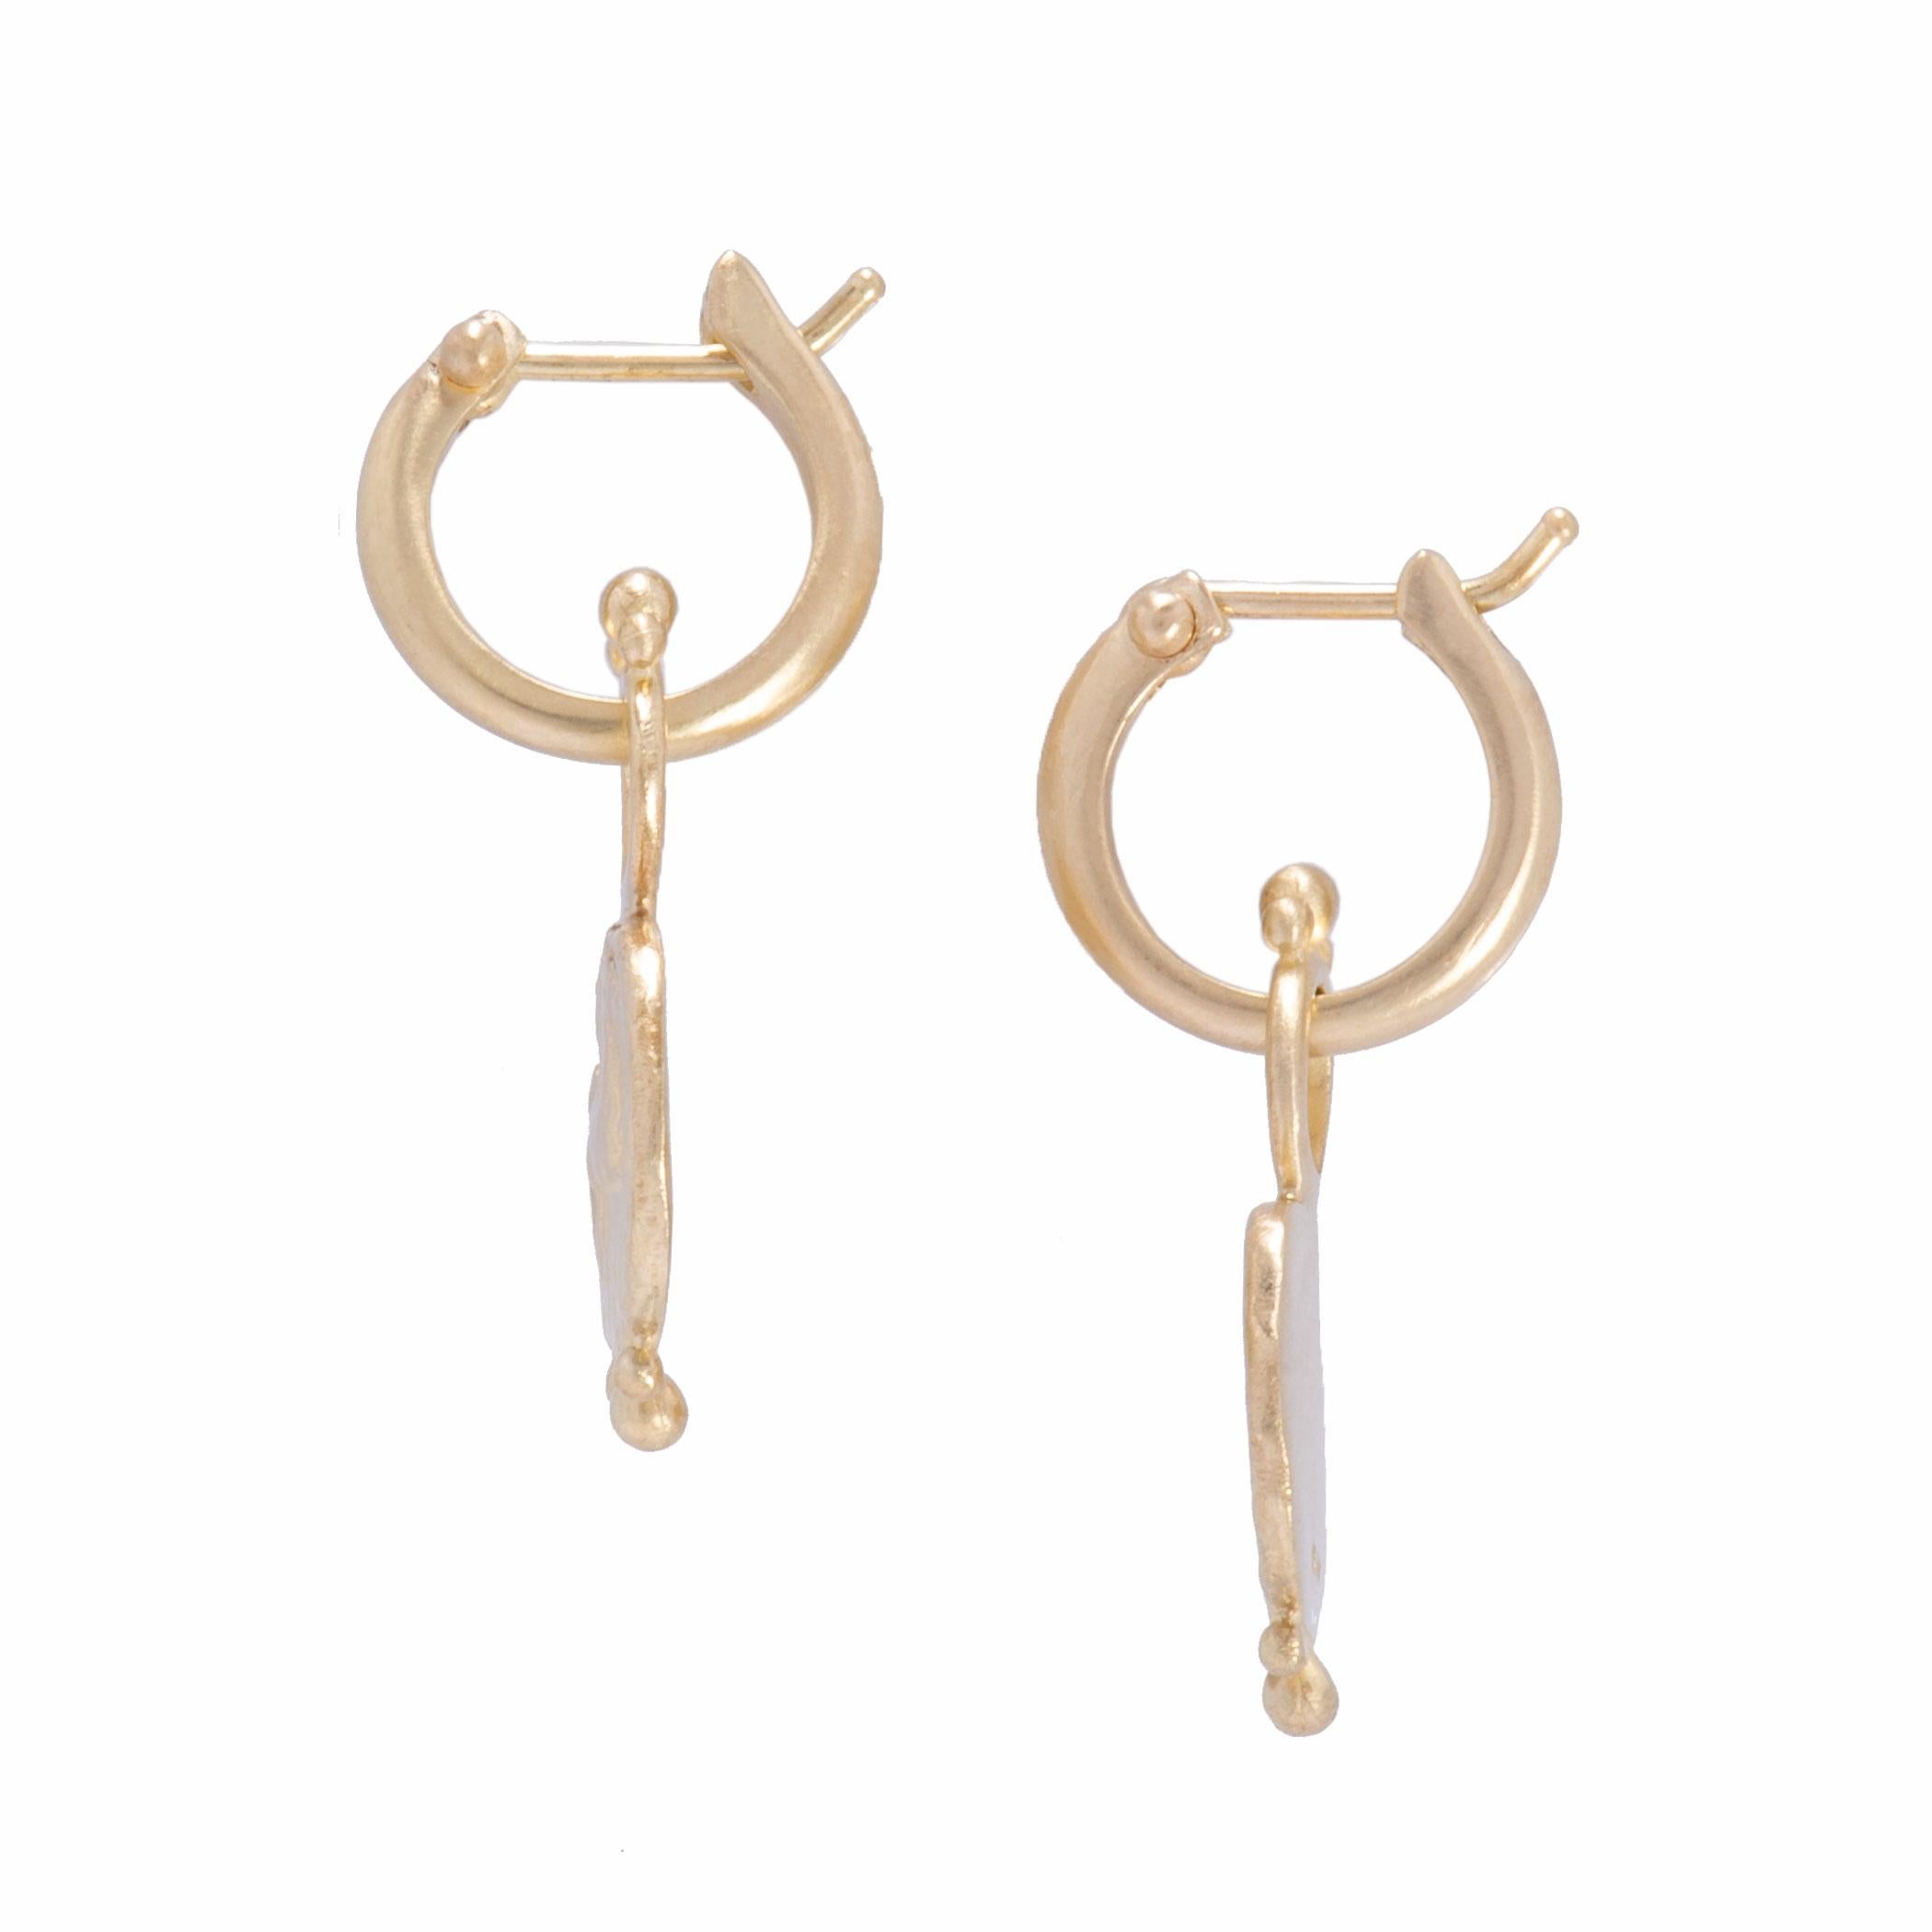 Prancing Horse Drop Earrings and Hoops in 18 Karat Gold In New Condition For Sale In Santa Fe, NM